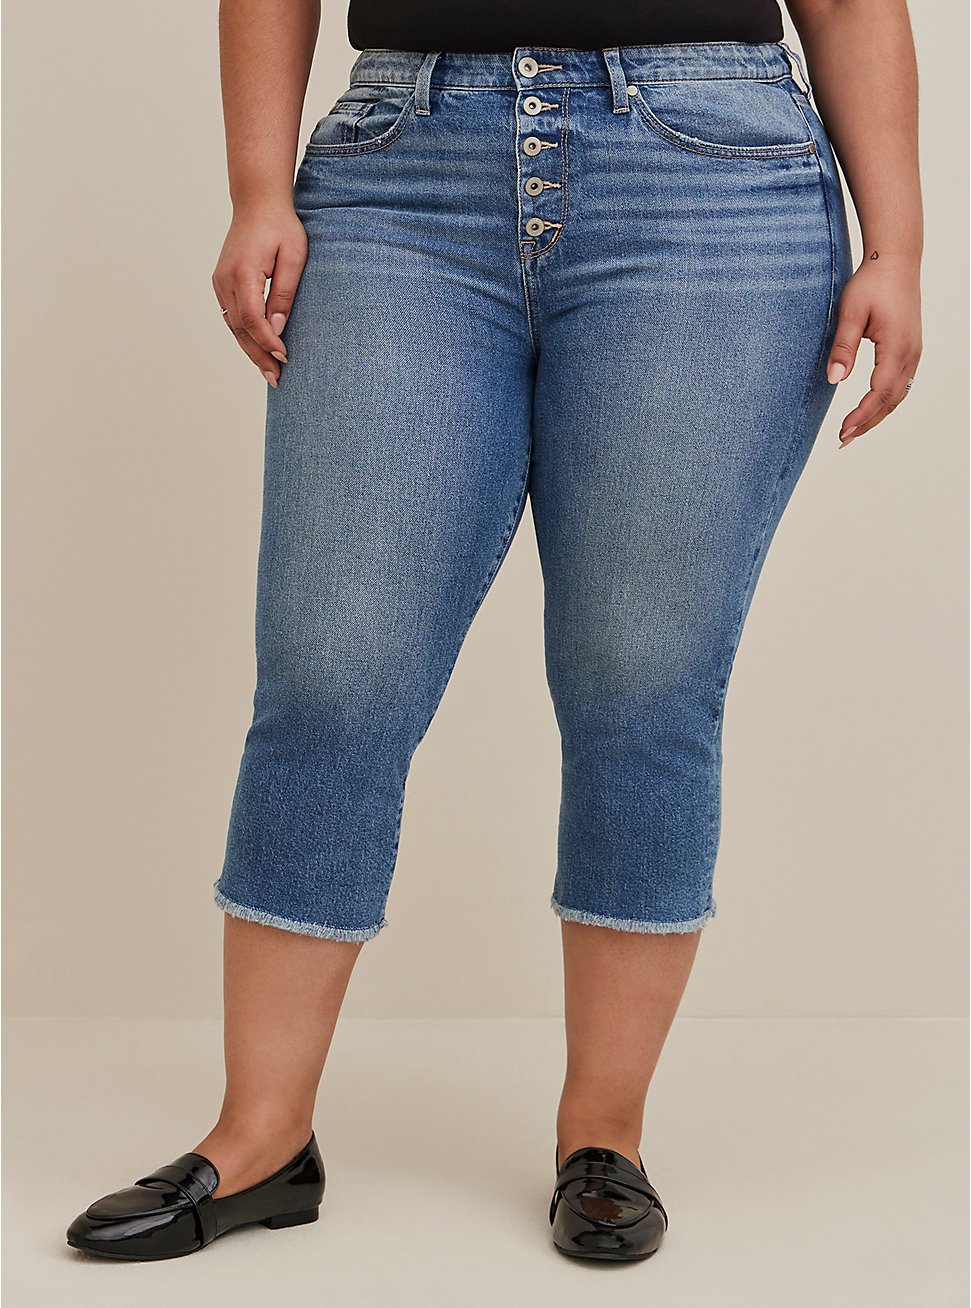 Plus Size Crop Stovepipe Straight Classic Denim High-Rise Jean, ATTABOY, hi-res